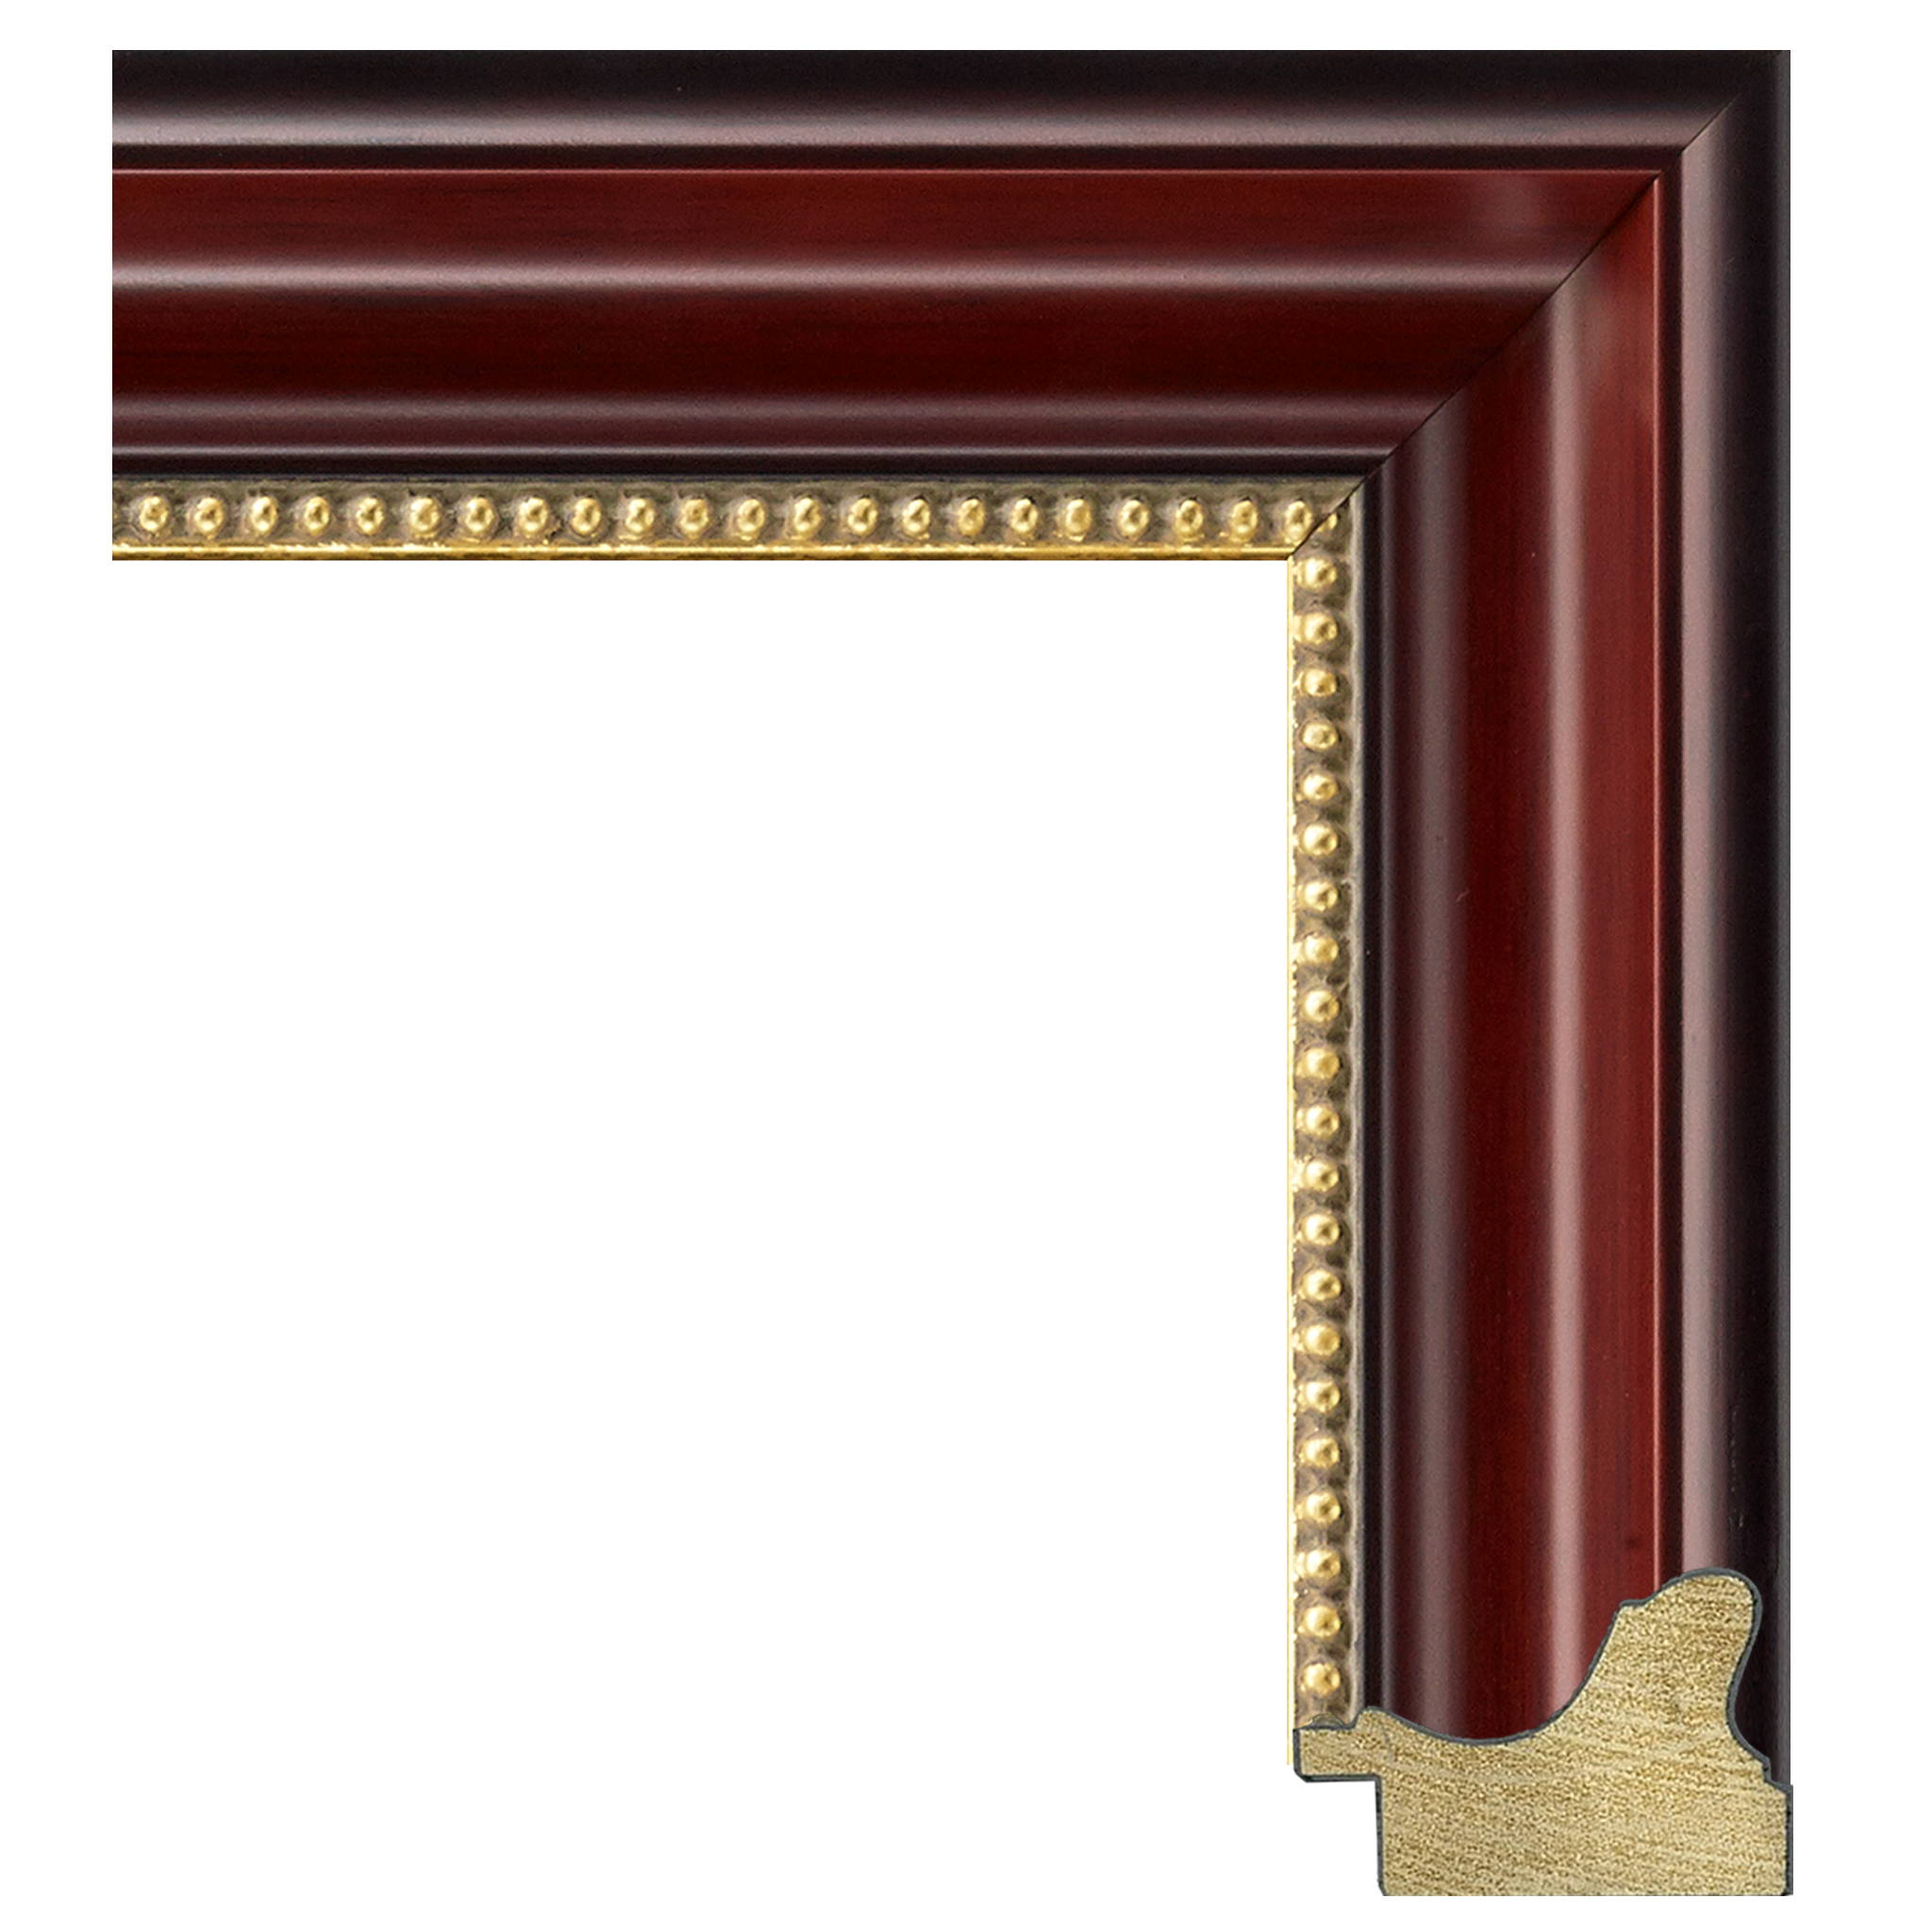 Gold and Silver Picture Frame Moulding Section I